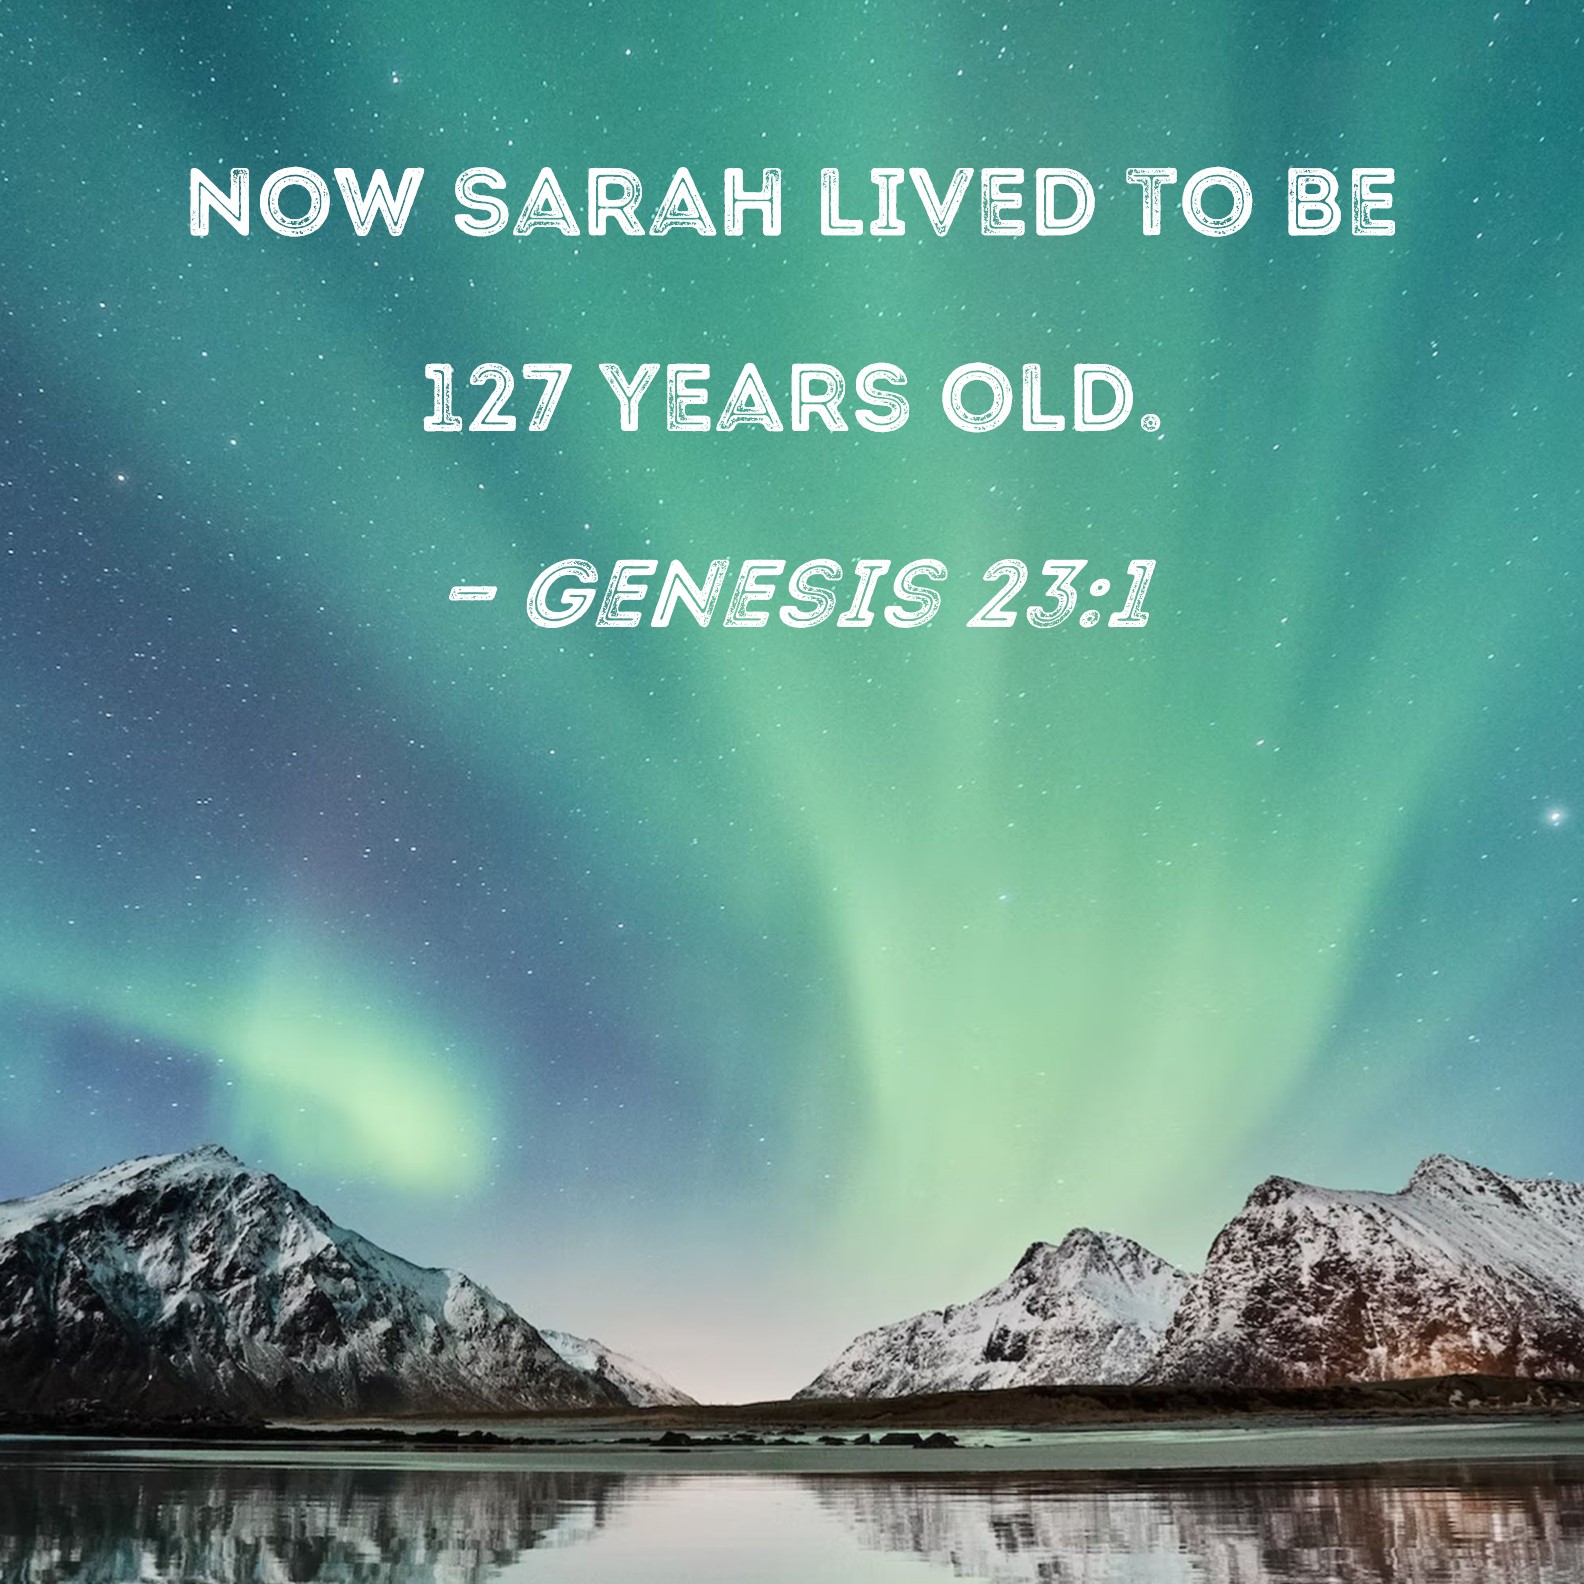 Genesis 23:1 Now Sarah lived to be 127 years old.